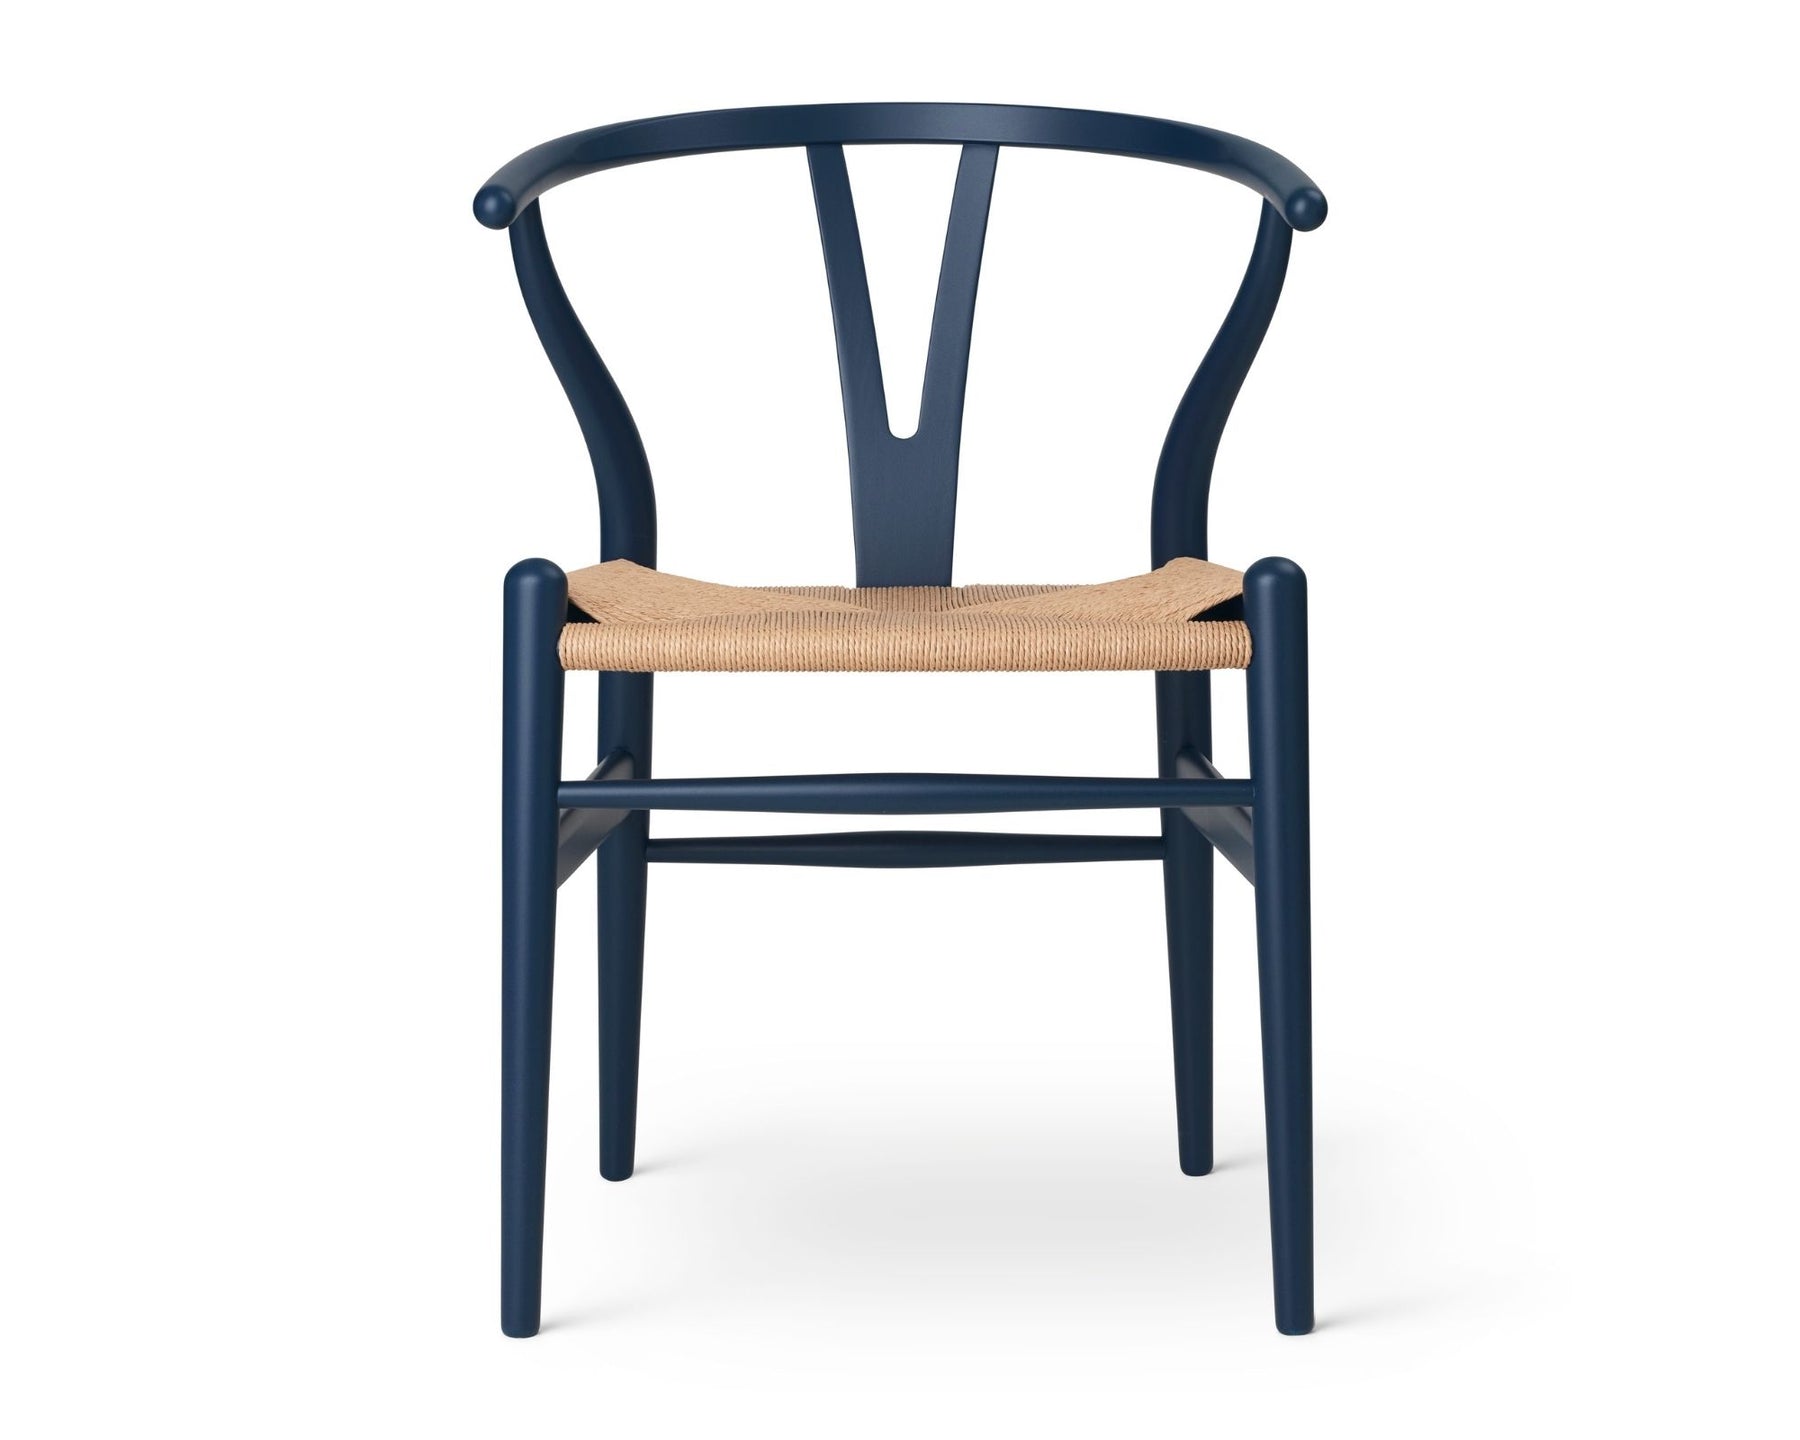 Painted Blue Dining Chair | DSHOP